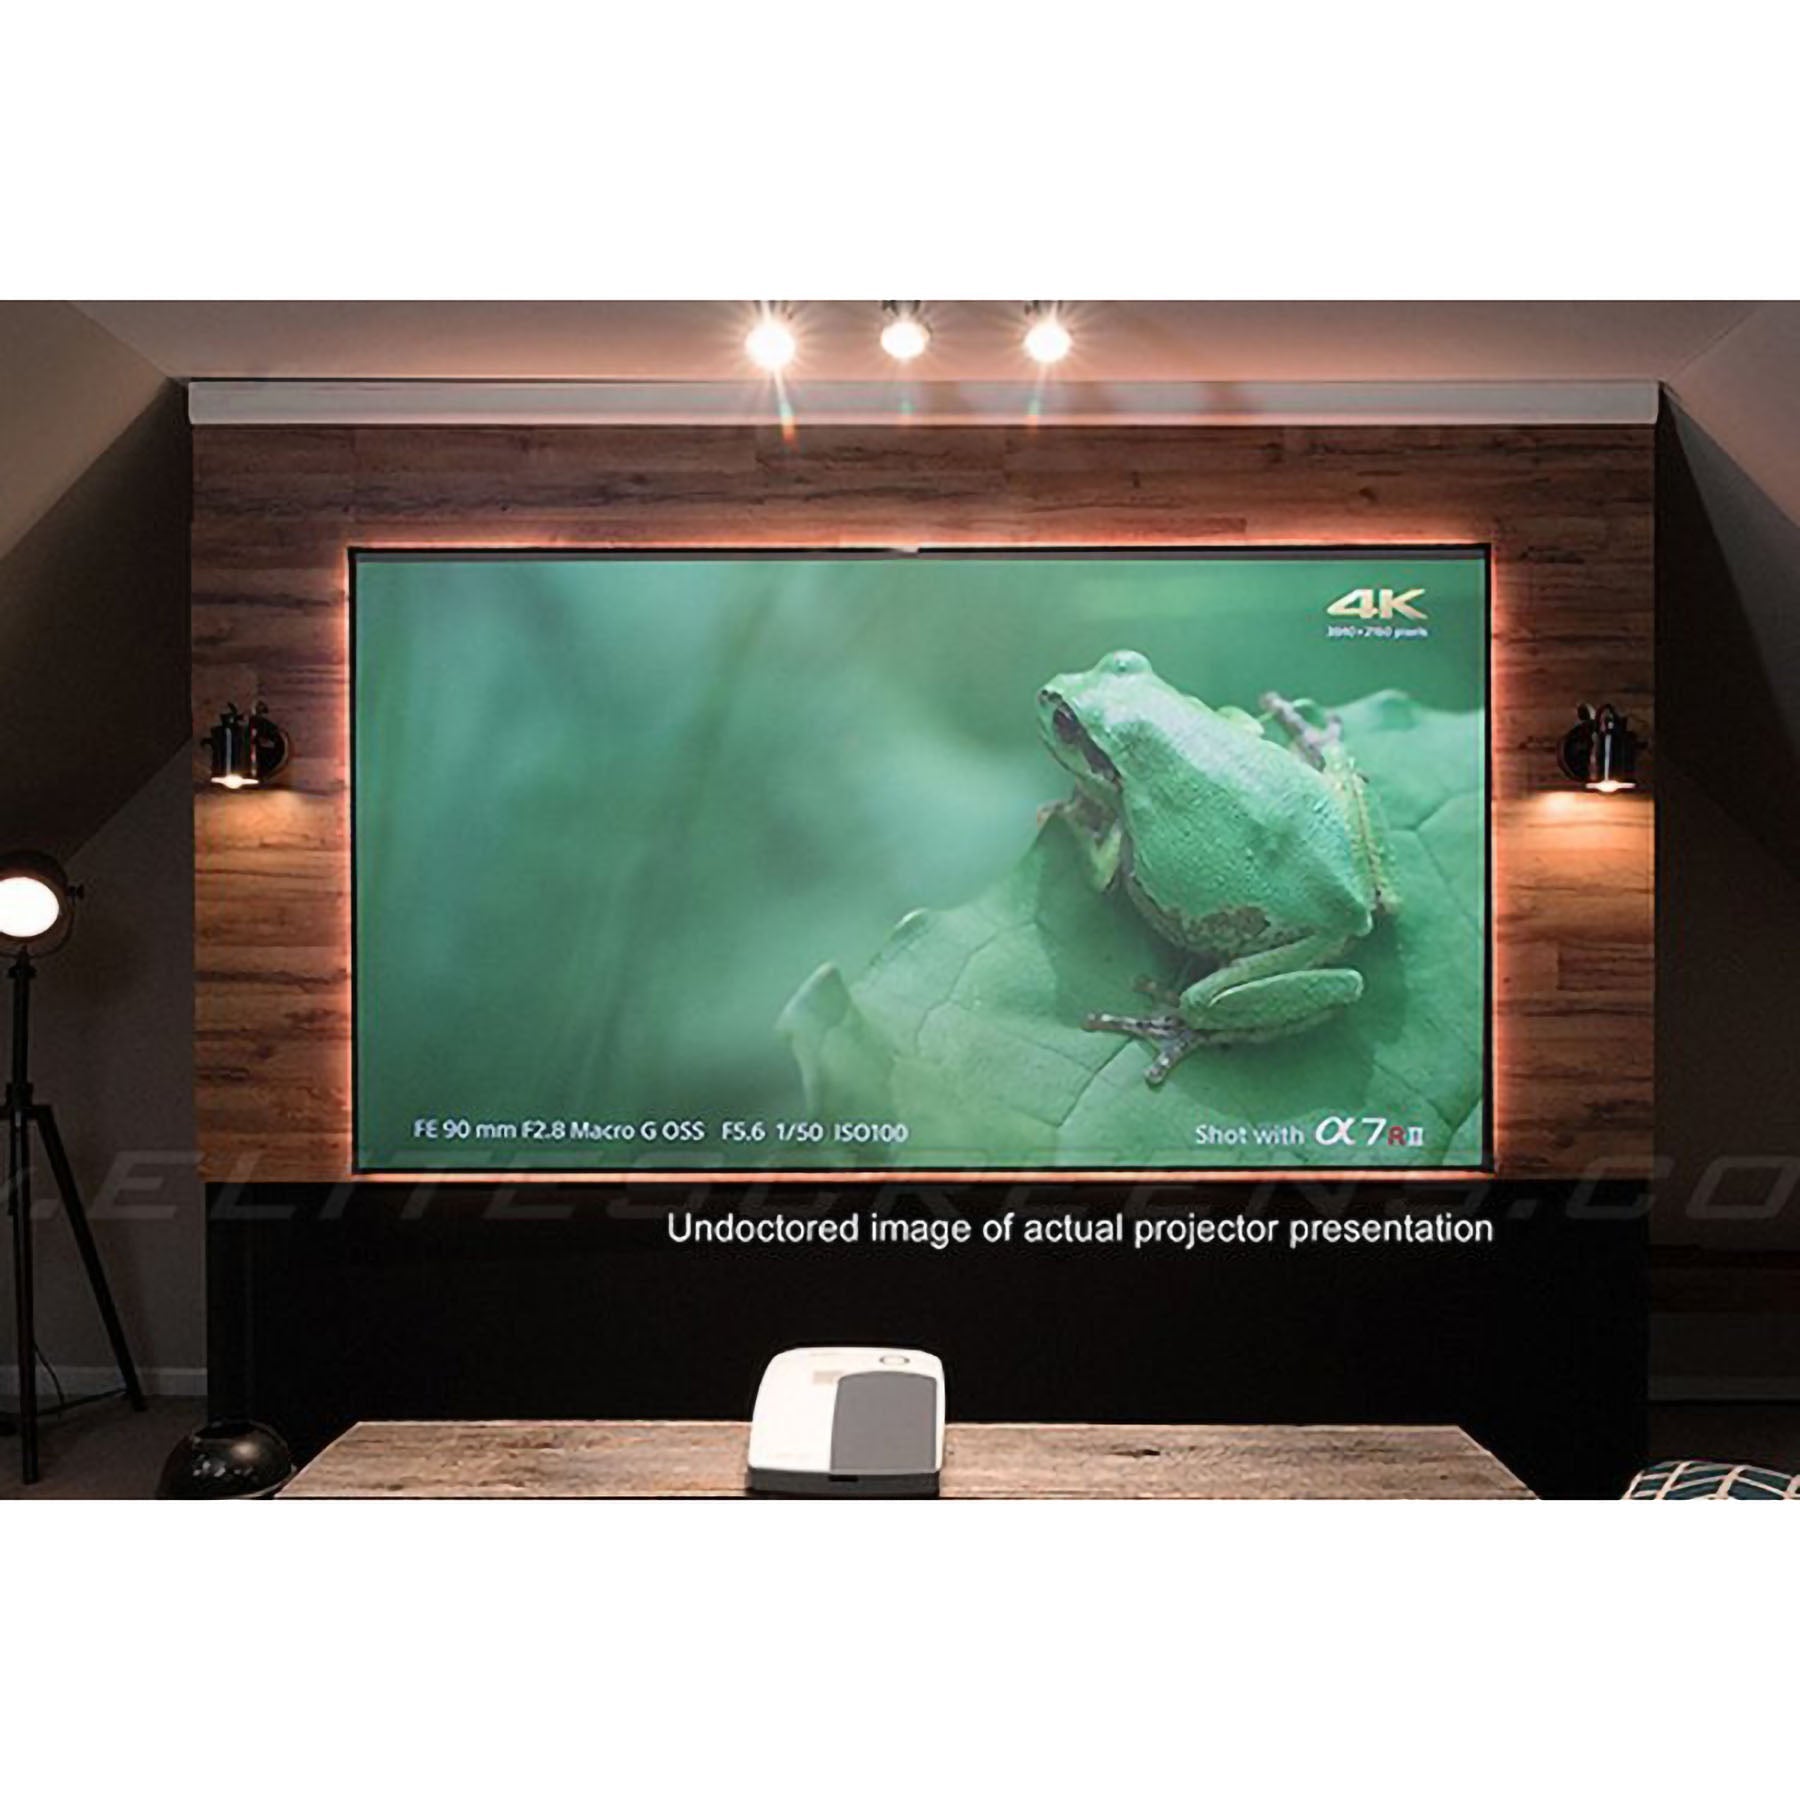 Elite Screens AR120H-CLR Aeon CLR 120" 16:9 4K for Ultra Short Throw Projectors with Ceiling Light Rejecting